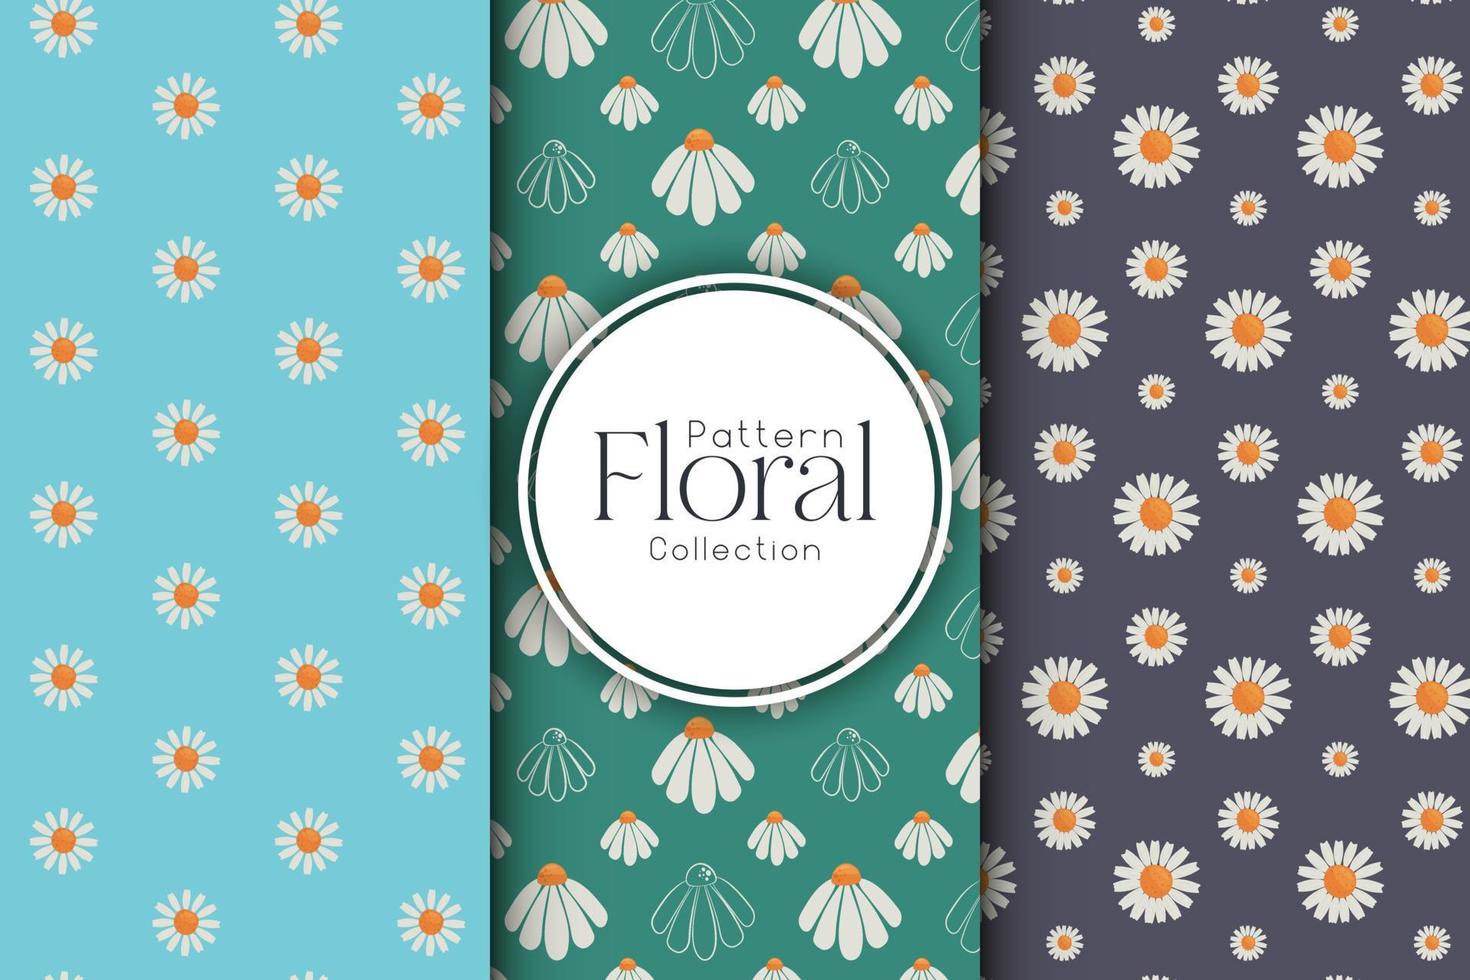 Stylish set of patterns with flowers vector